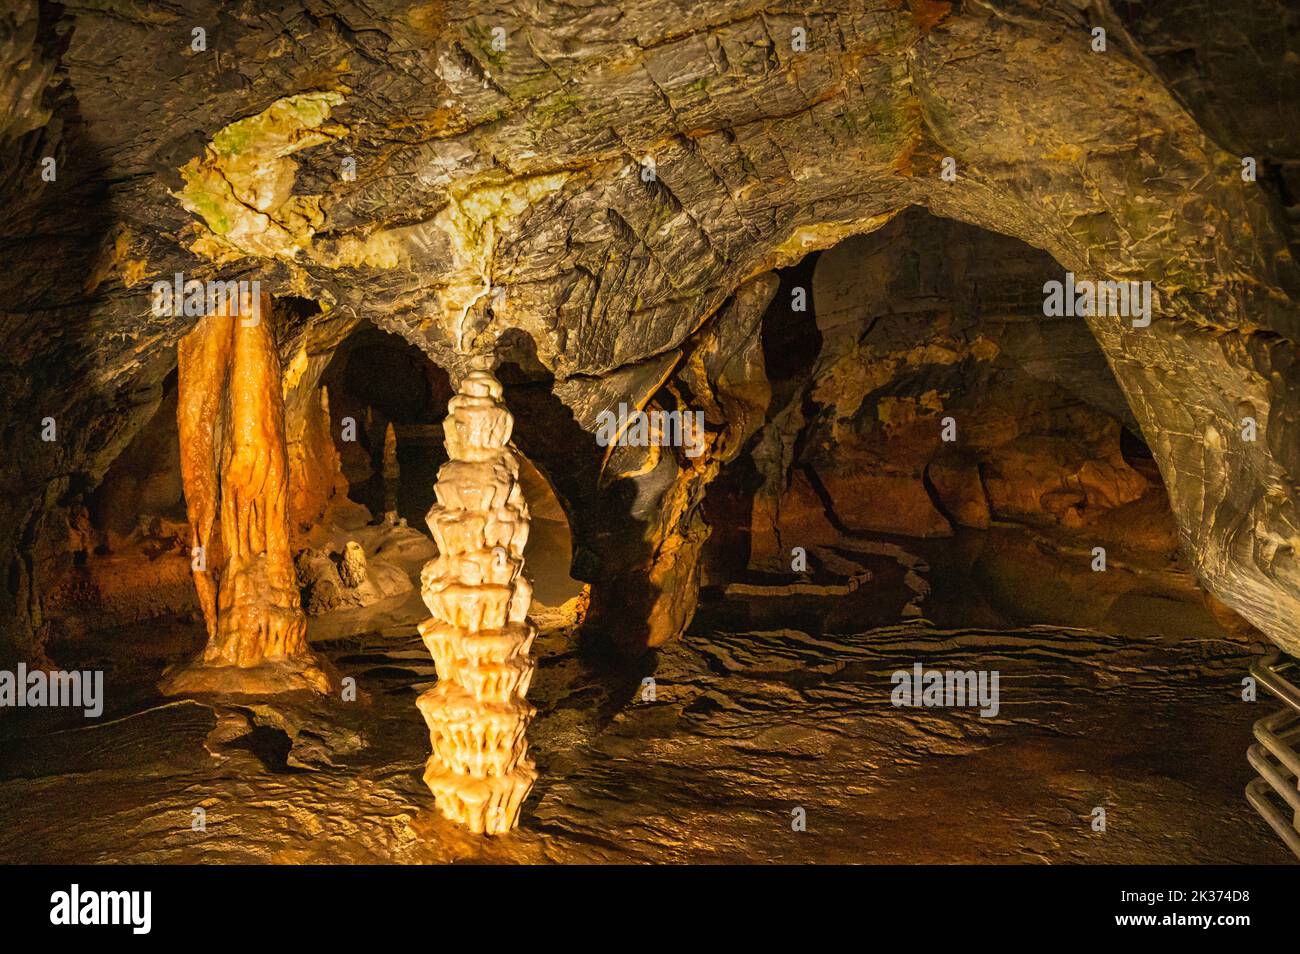 Grotte di Toirano meaning Toirano Caves are a karst cave system in Toirano, Italy Stock Photo